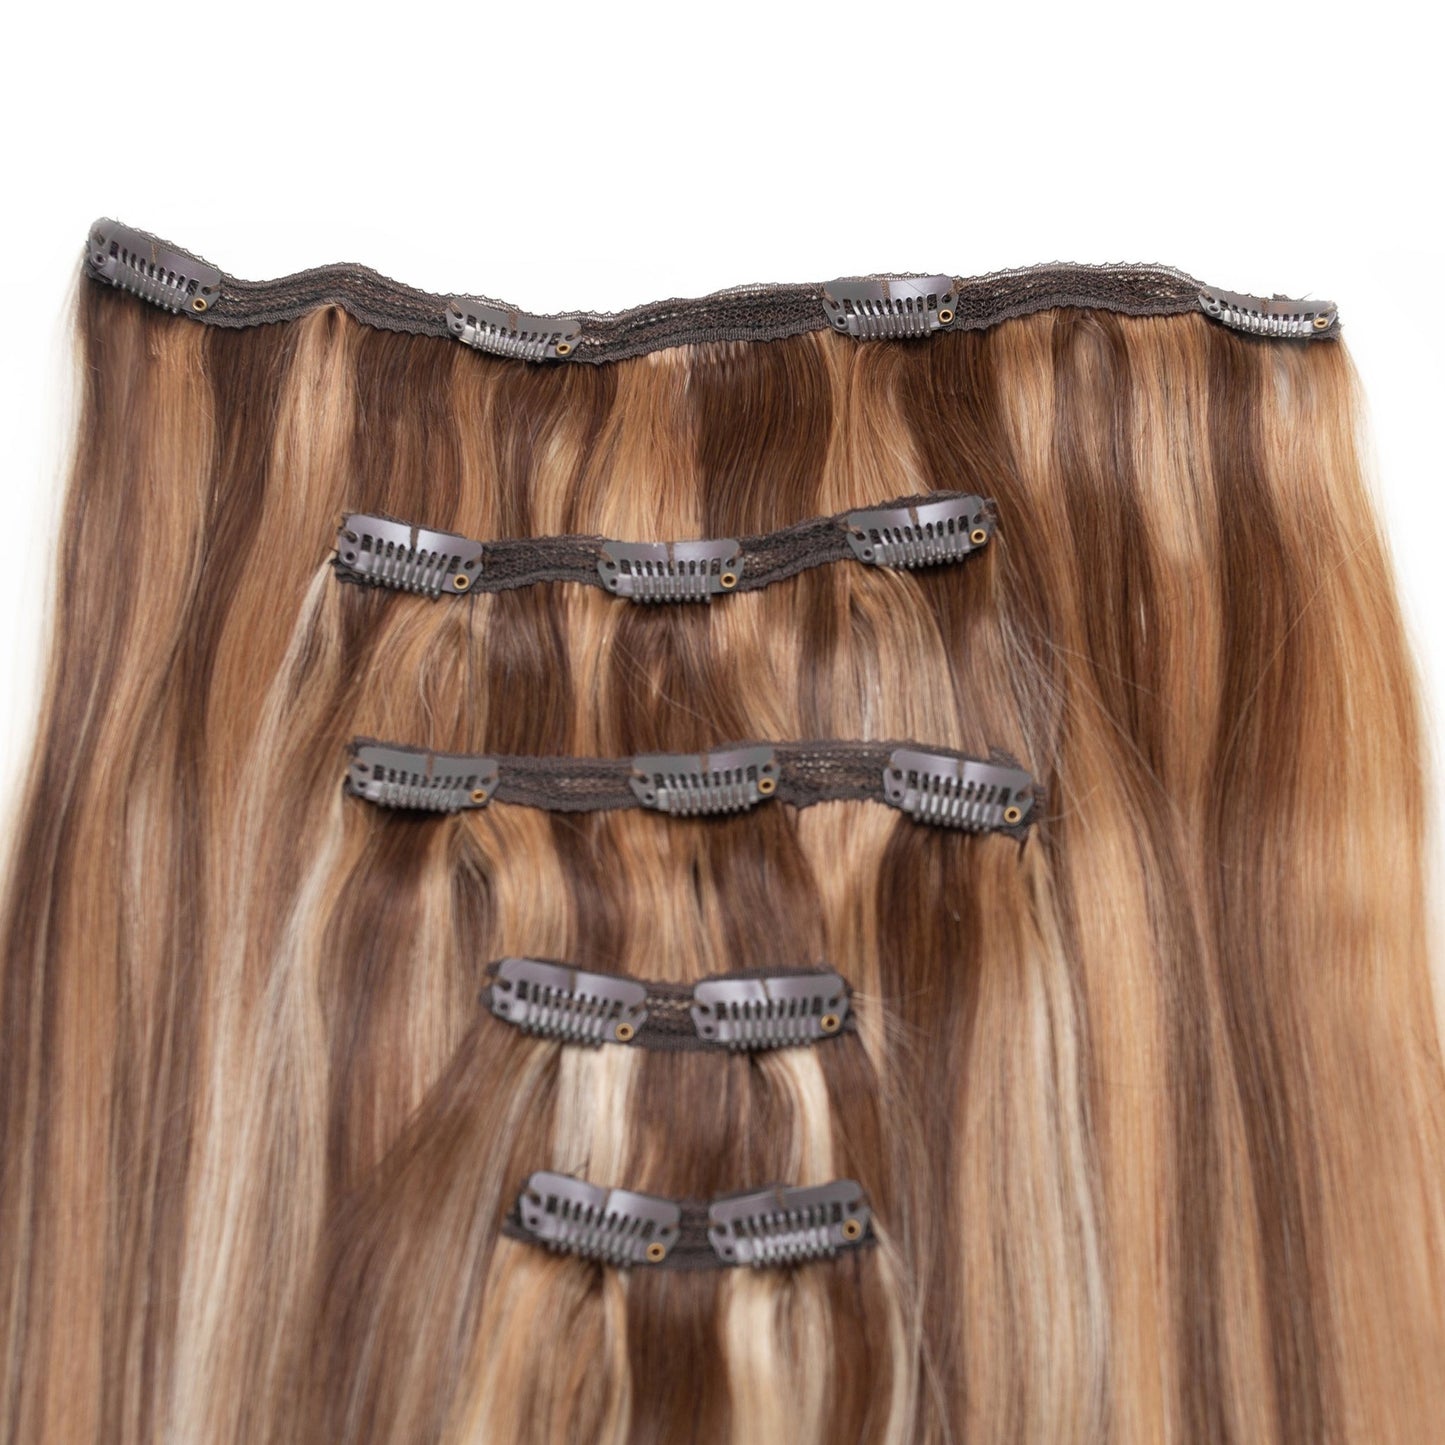 Seamless1 Espresso Human Hair in 5 Piece - shelley and co